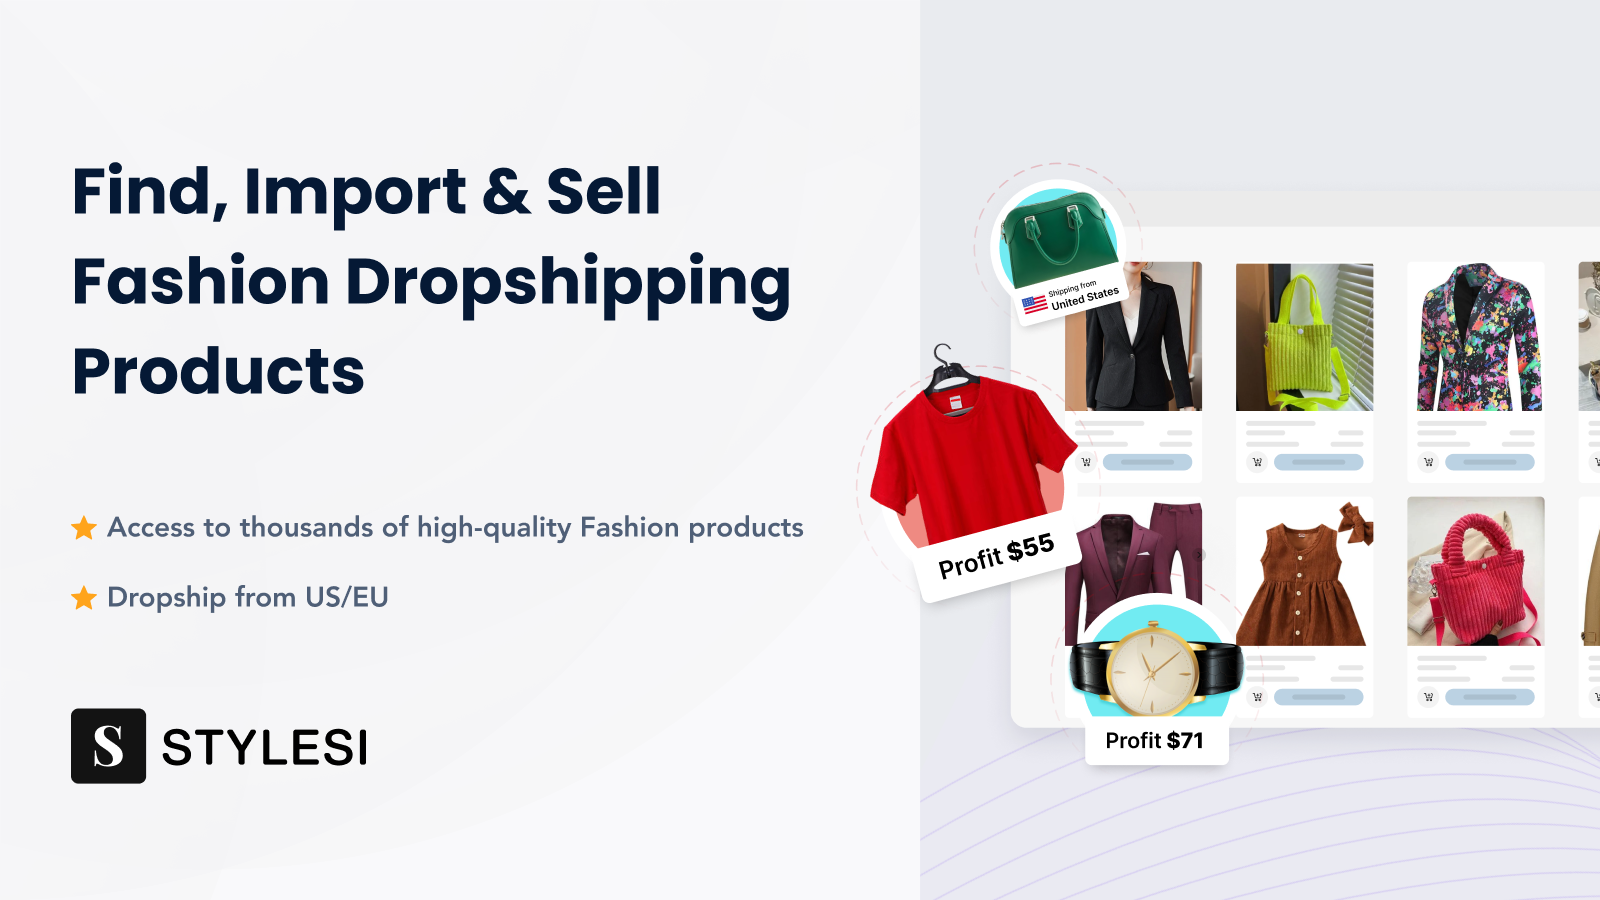 Find, Import & Sell Fashion Dropshipping Products